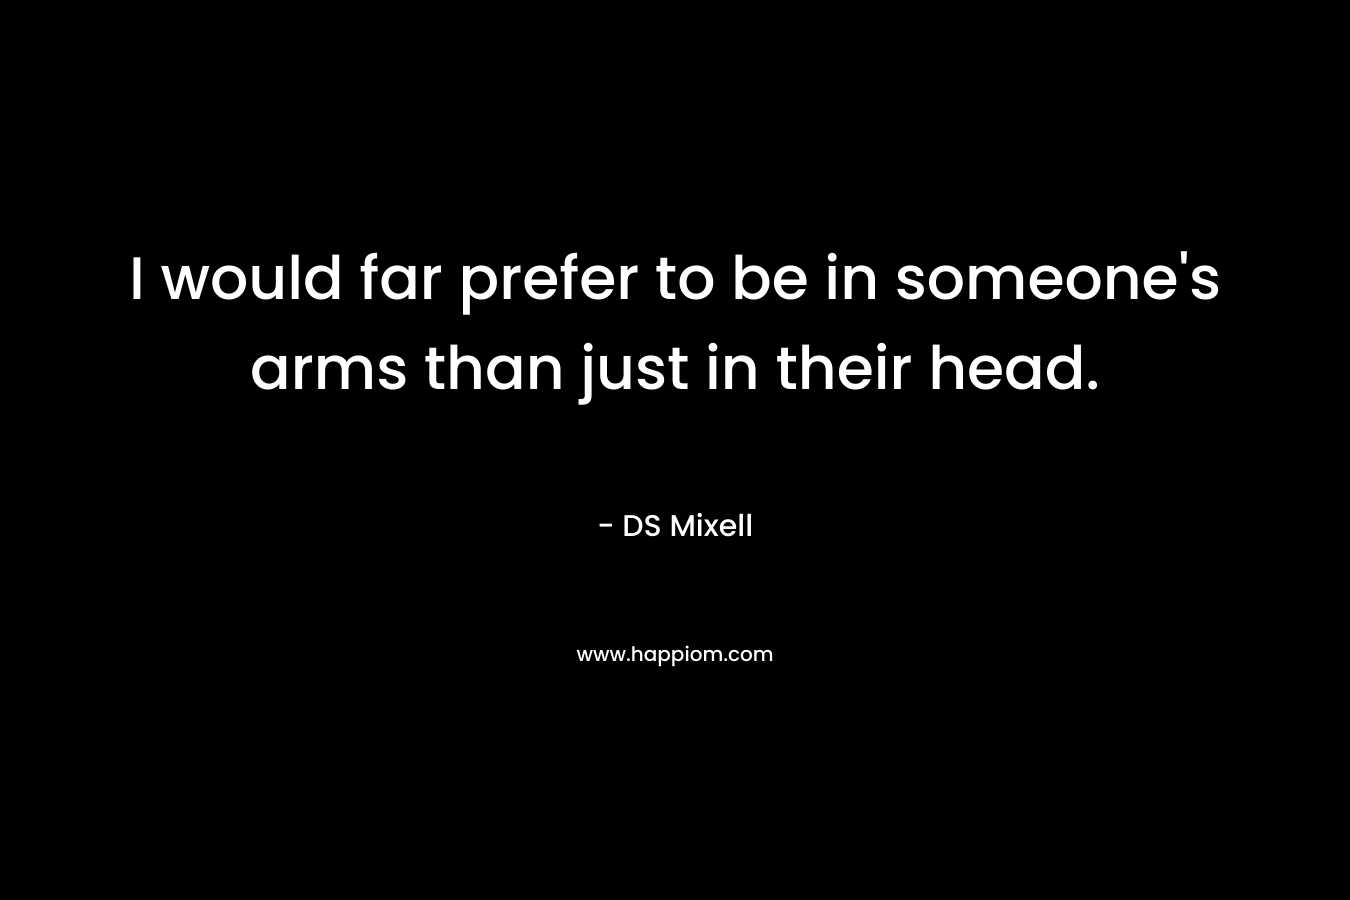 I would far prefer to be in someone's arms than just in their head.